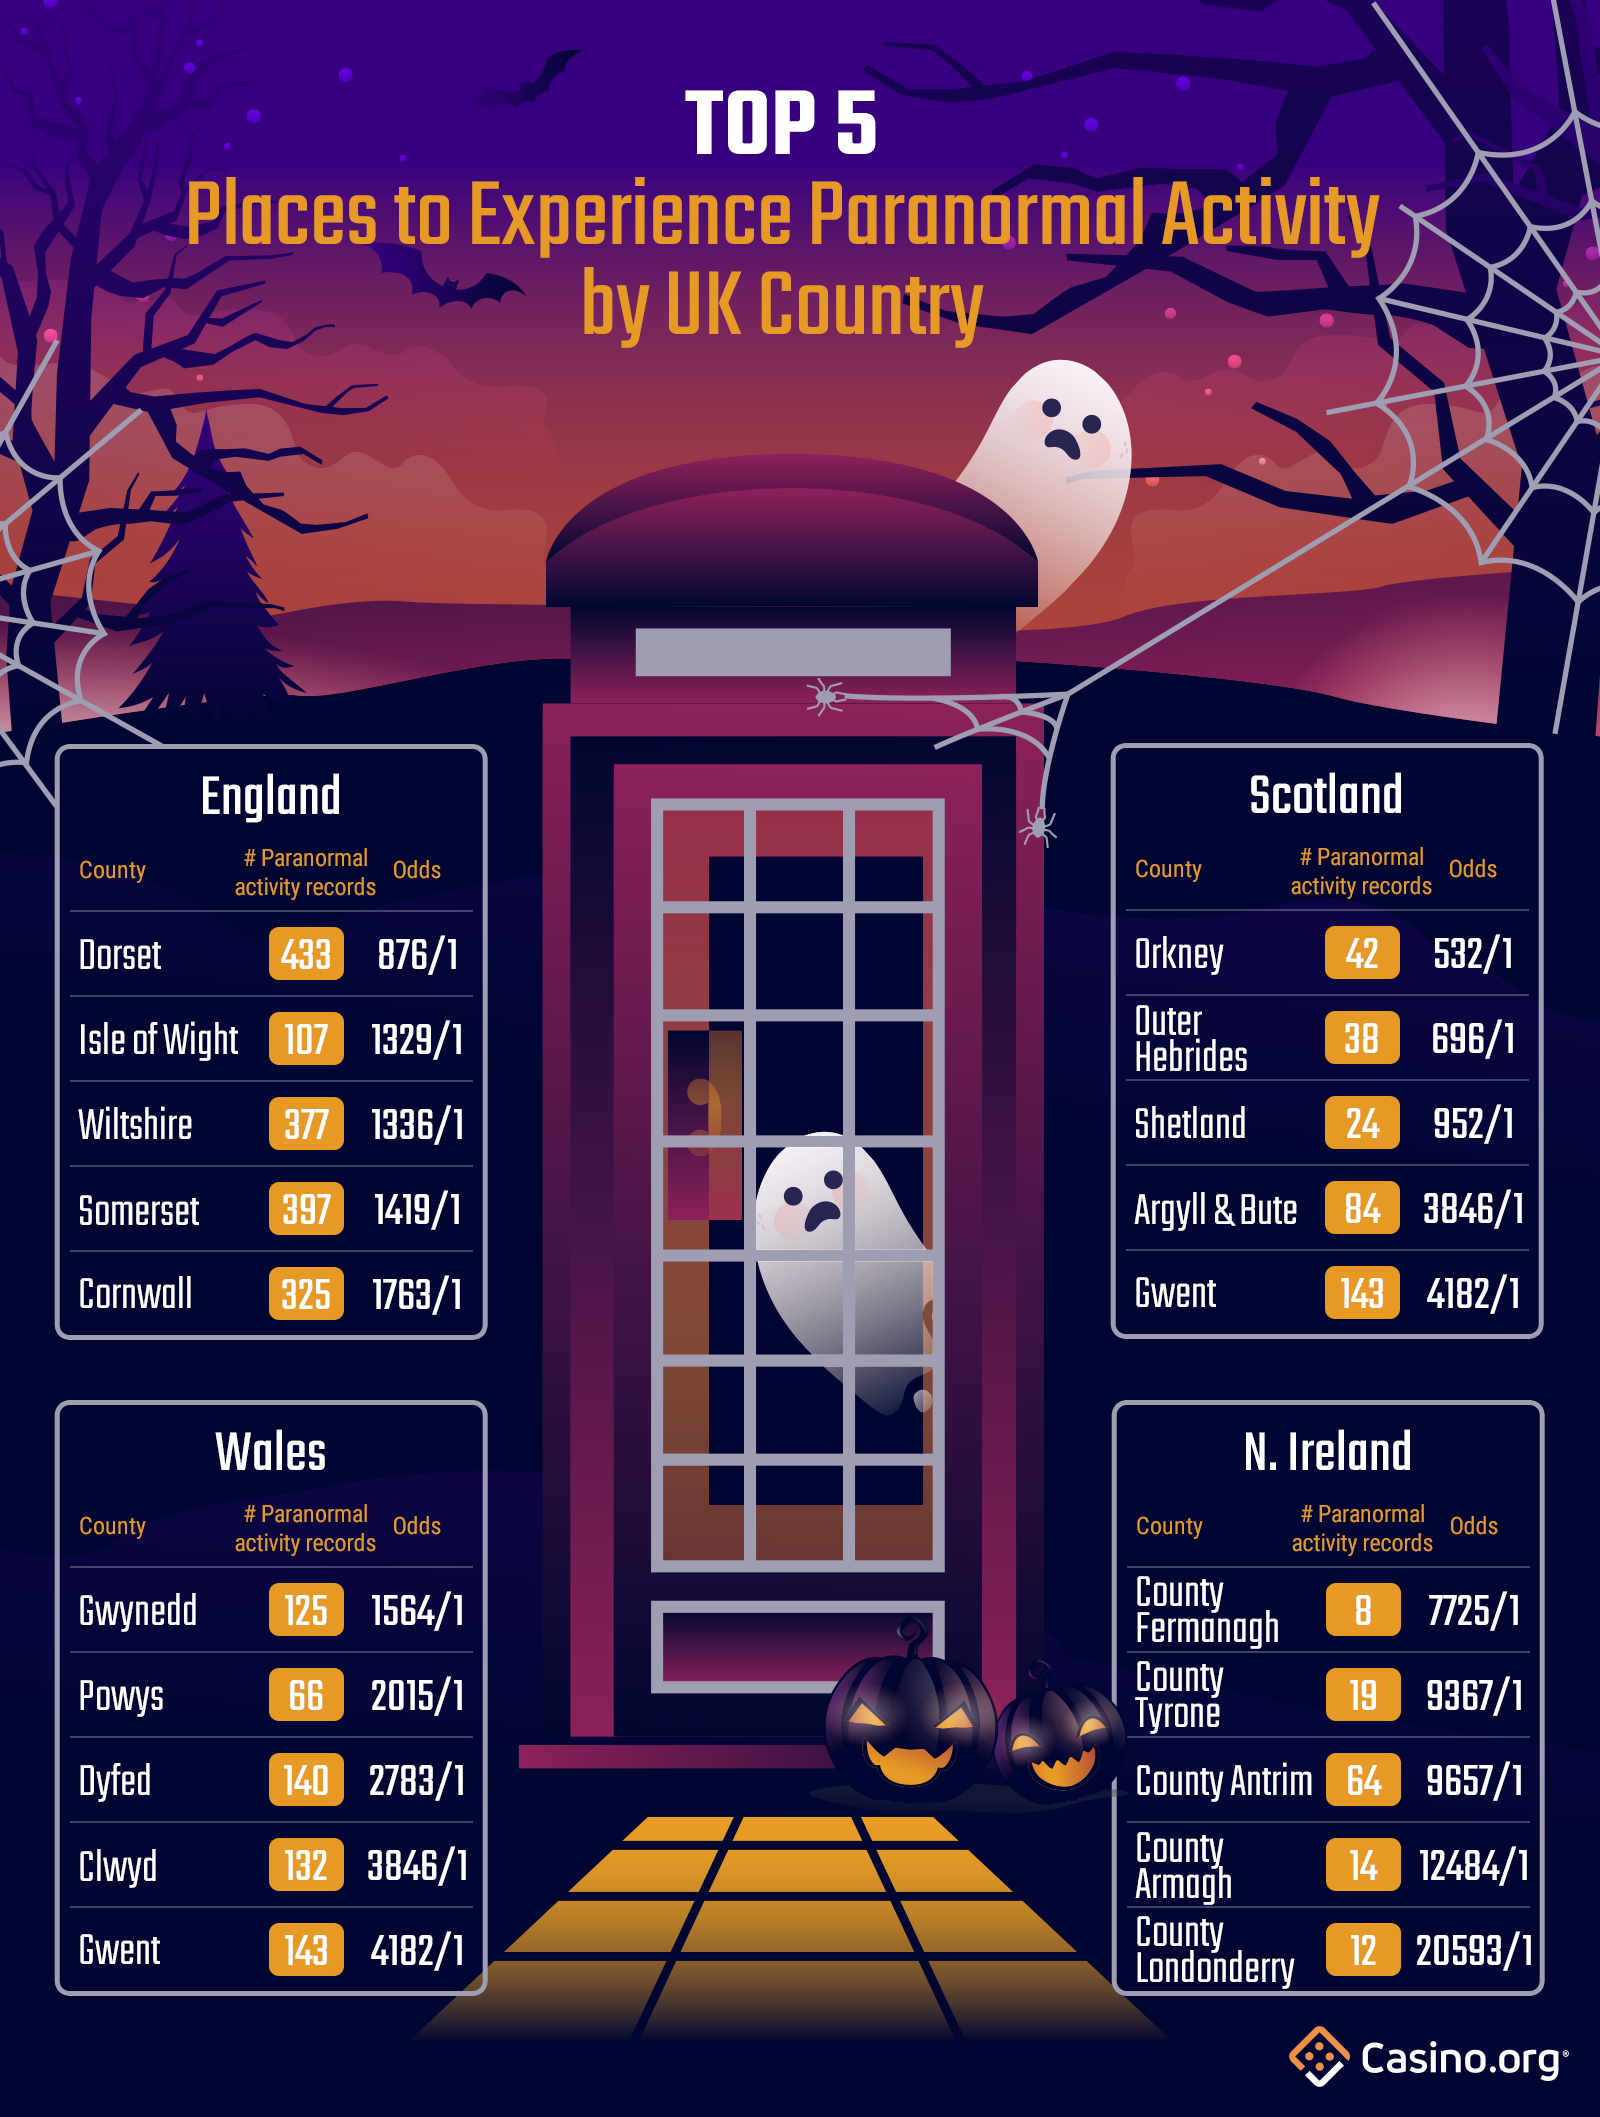 Top 5 Places To Experience Paranormal Activity By UK Country 